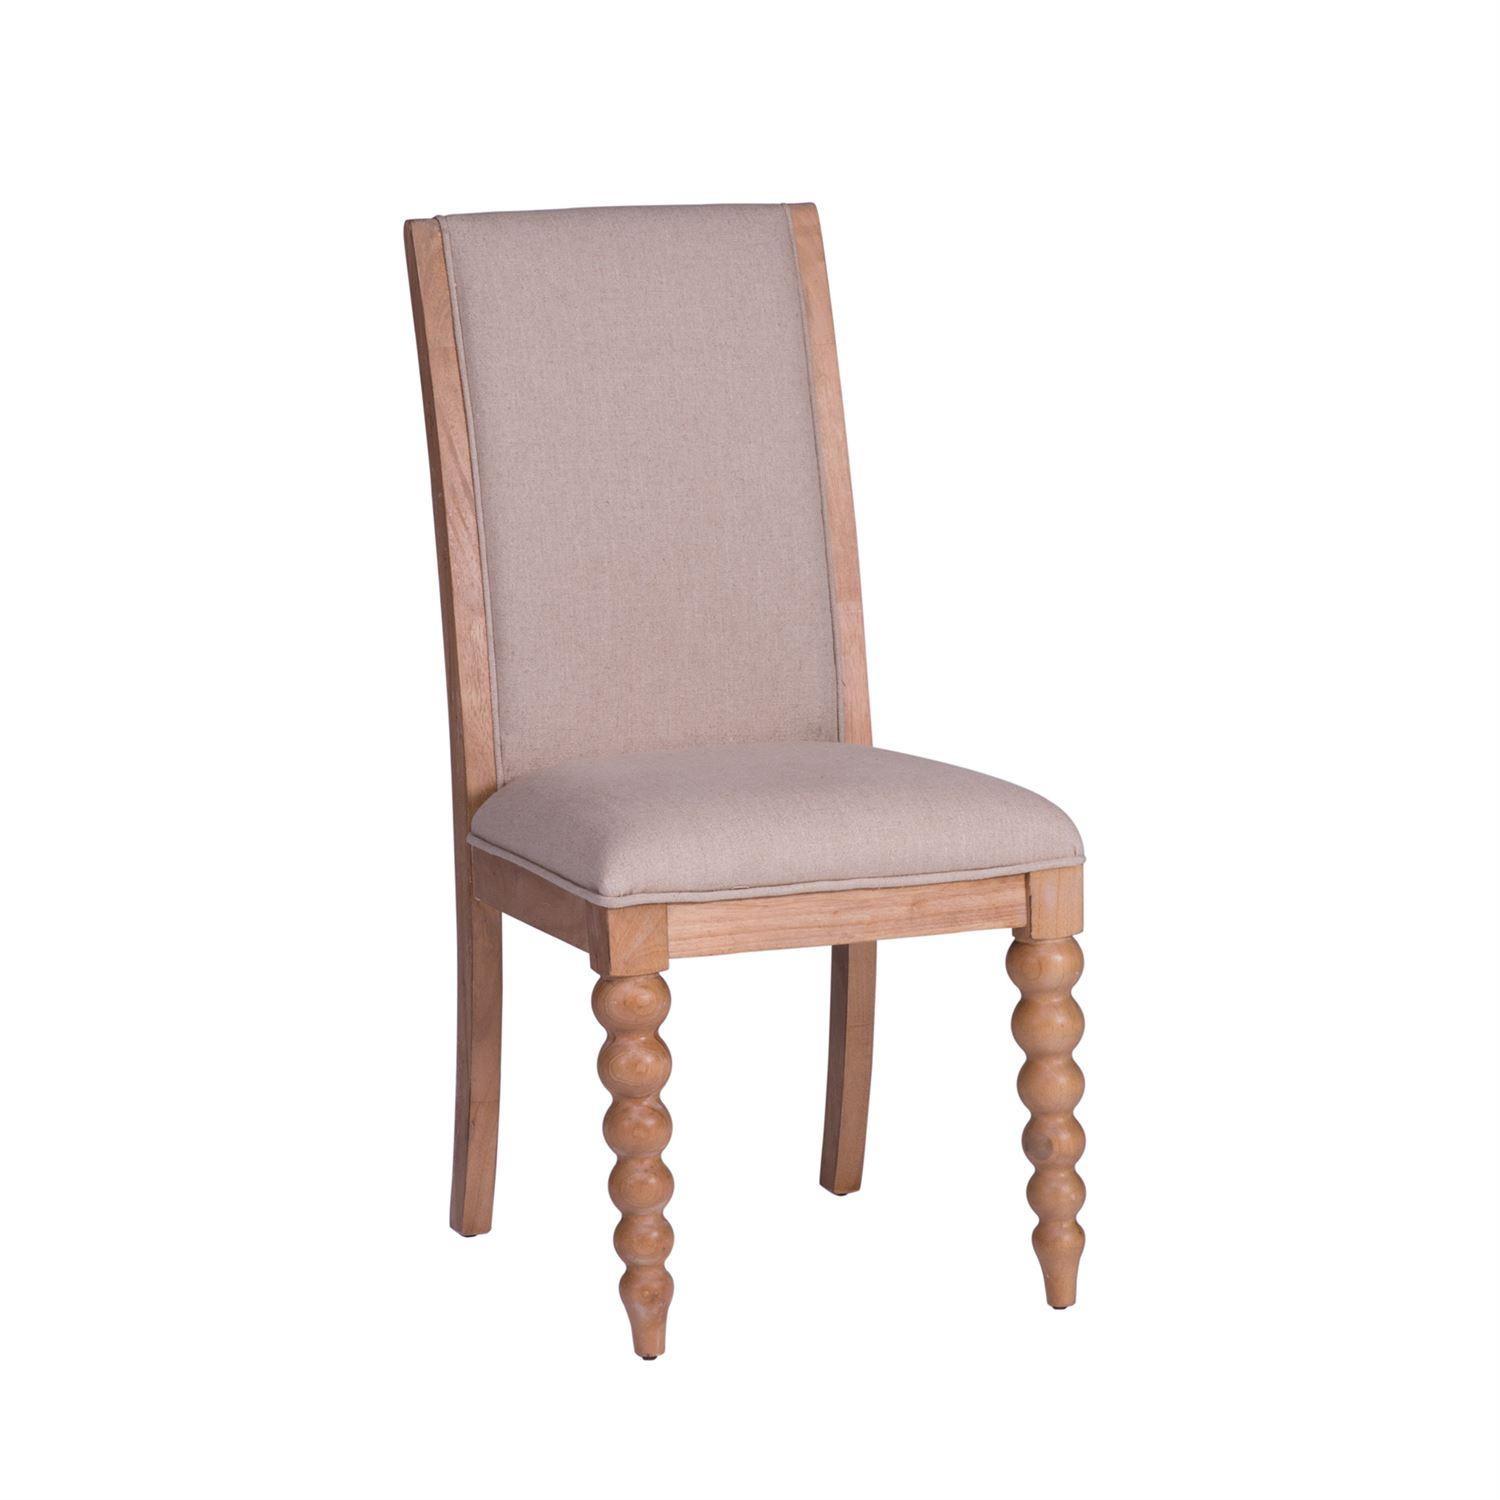 Contemporary Dining Side Chair Harbor View  (531-DR) Dining Side Chair 531-C6501 in Beige 